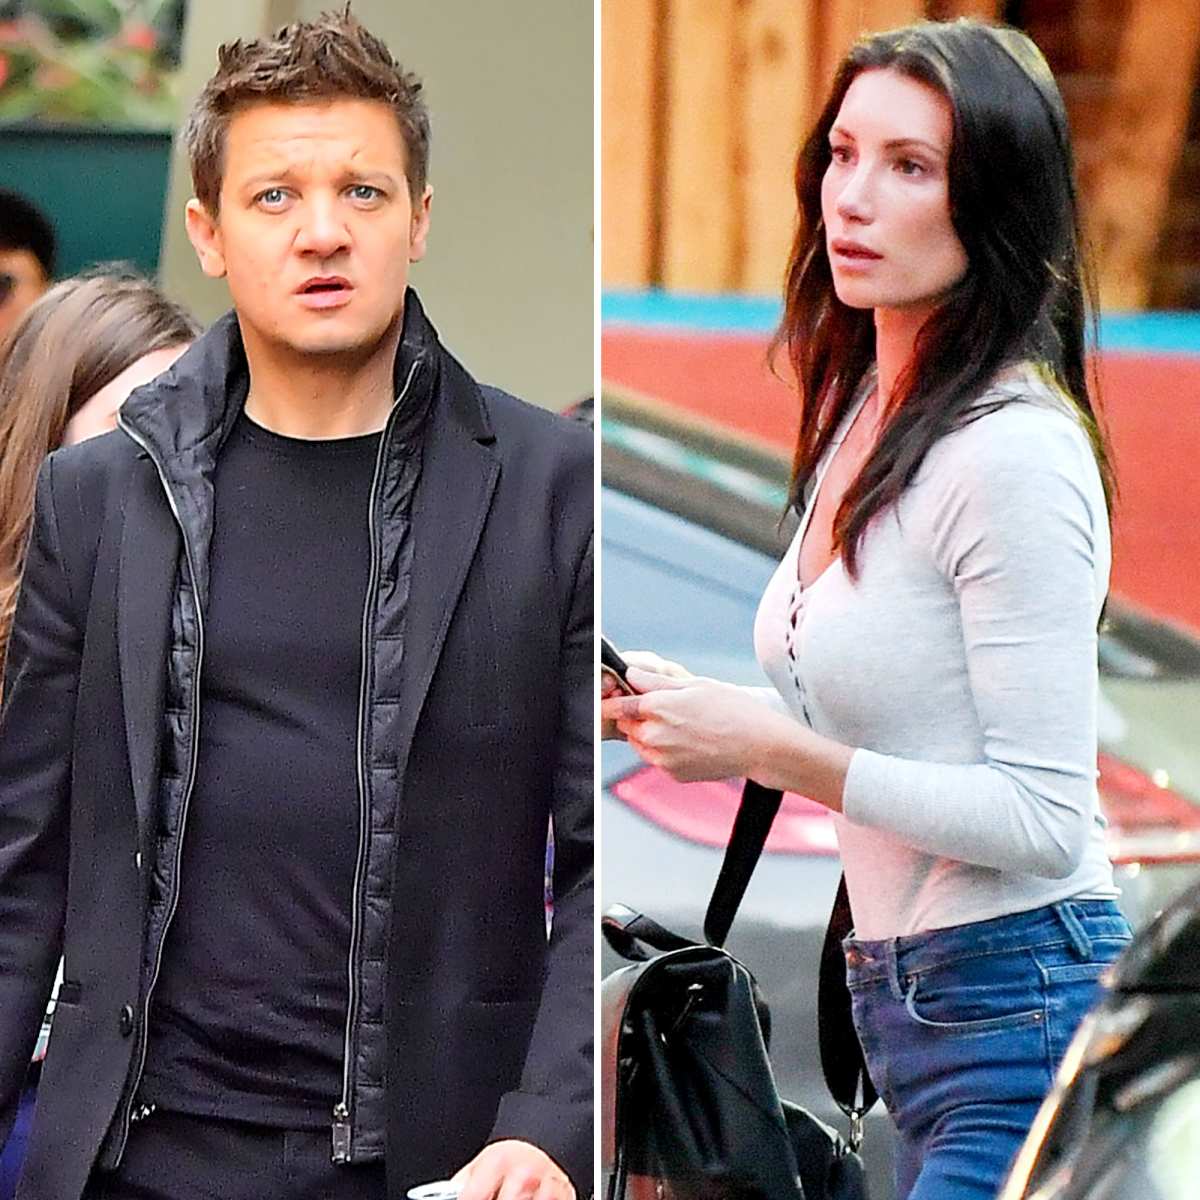 Jeremy Renner Ex Wife Claims He Threatened To Kill Her He Responds 01 ?w=1200&quality=55&strip=all